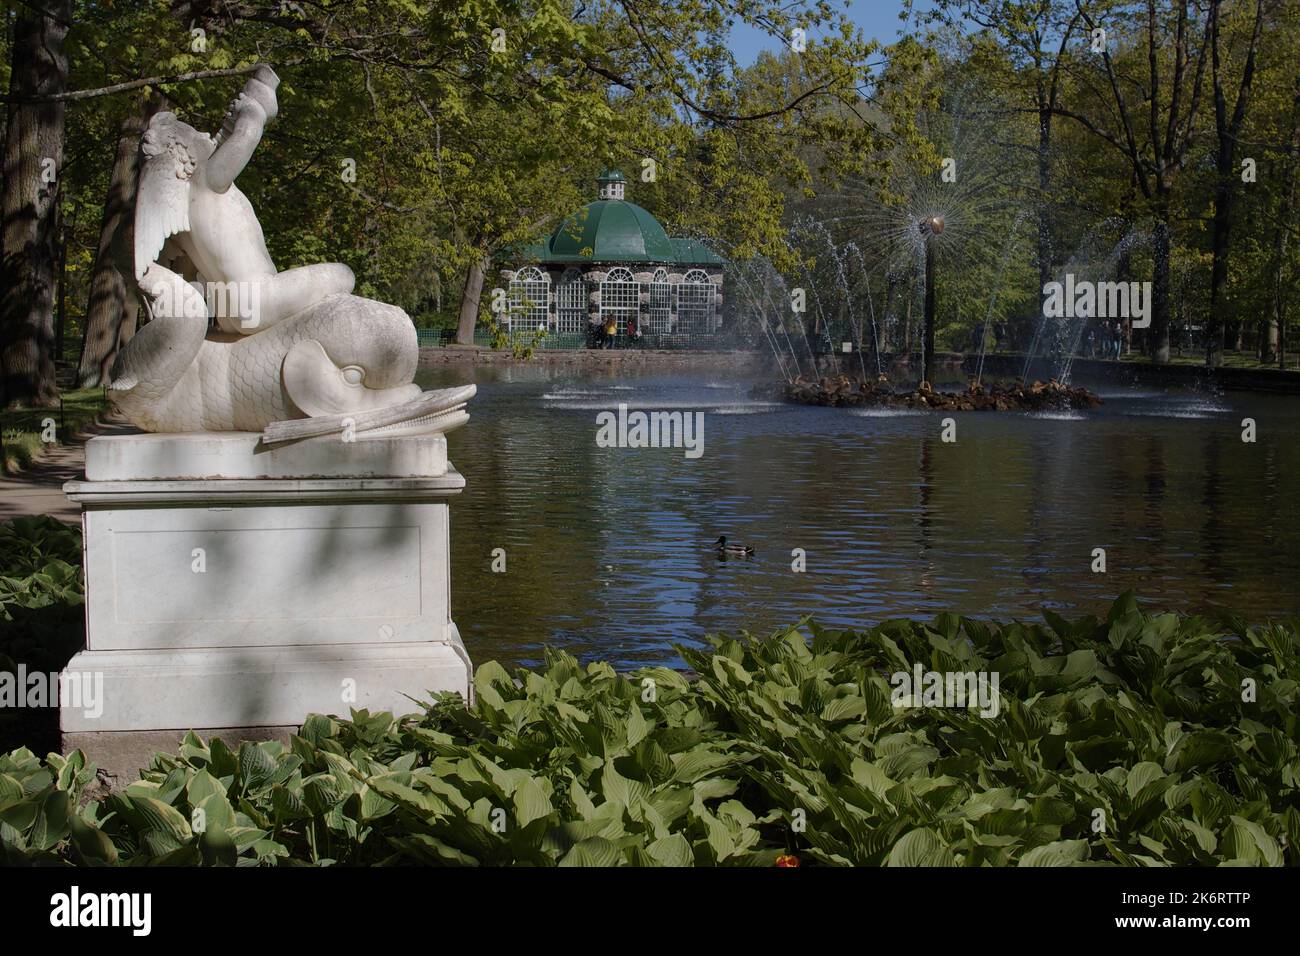 Sculpture Boy On A Dolphin against the Menagerie pond with the fountain Sun in the Lower Park of Peterhof, St. Petersburg, Russia Stock Photo